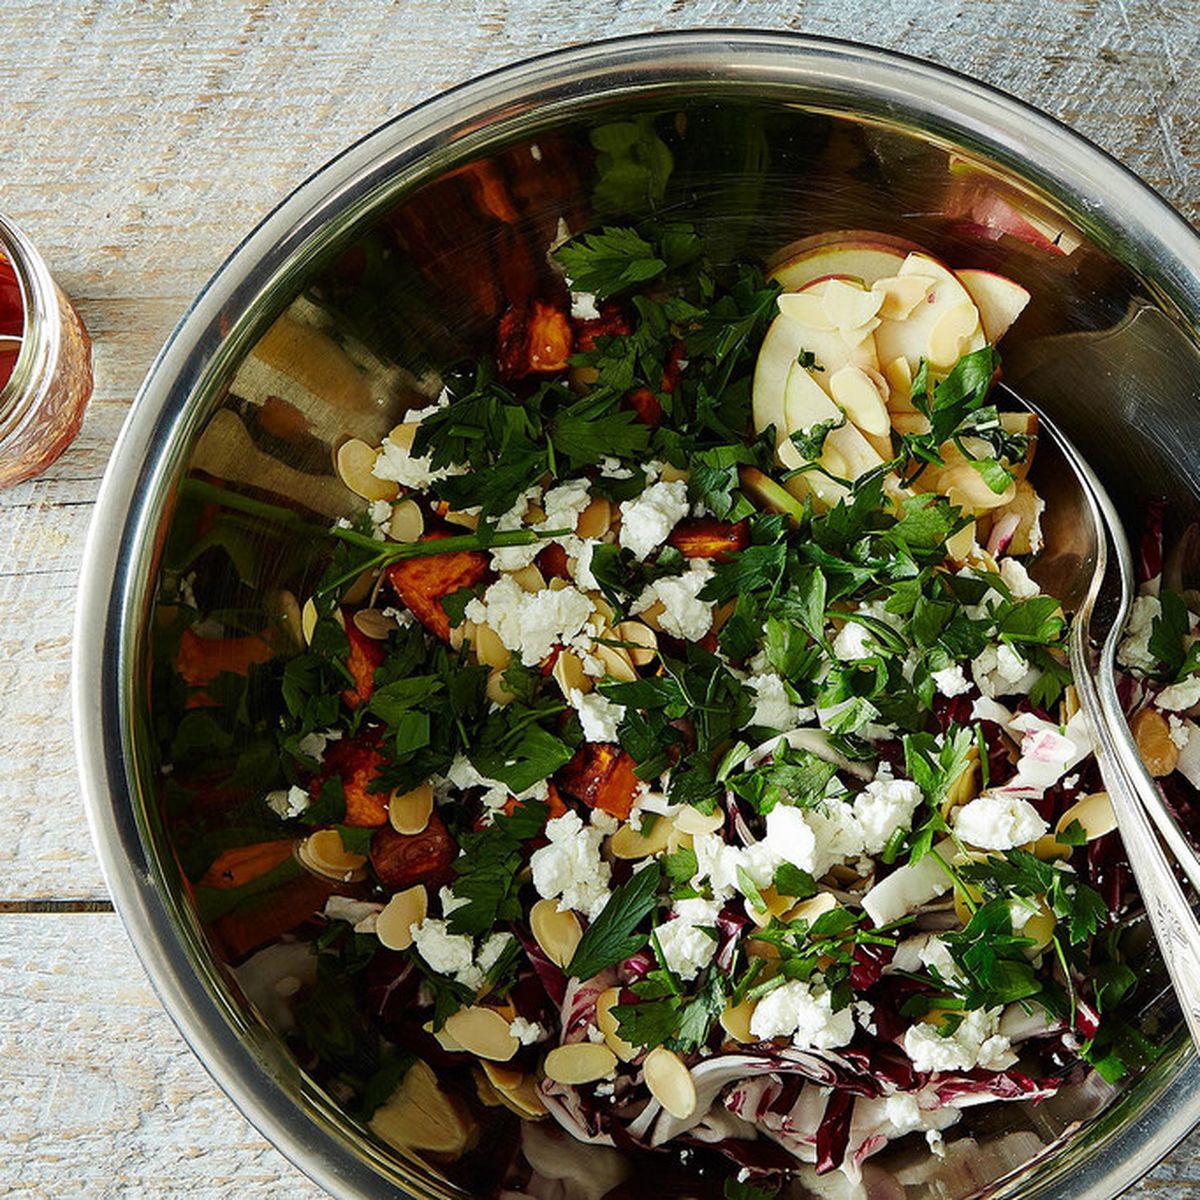 Why You Should Eat Salads from Mixing Bowls